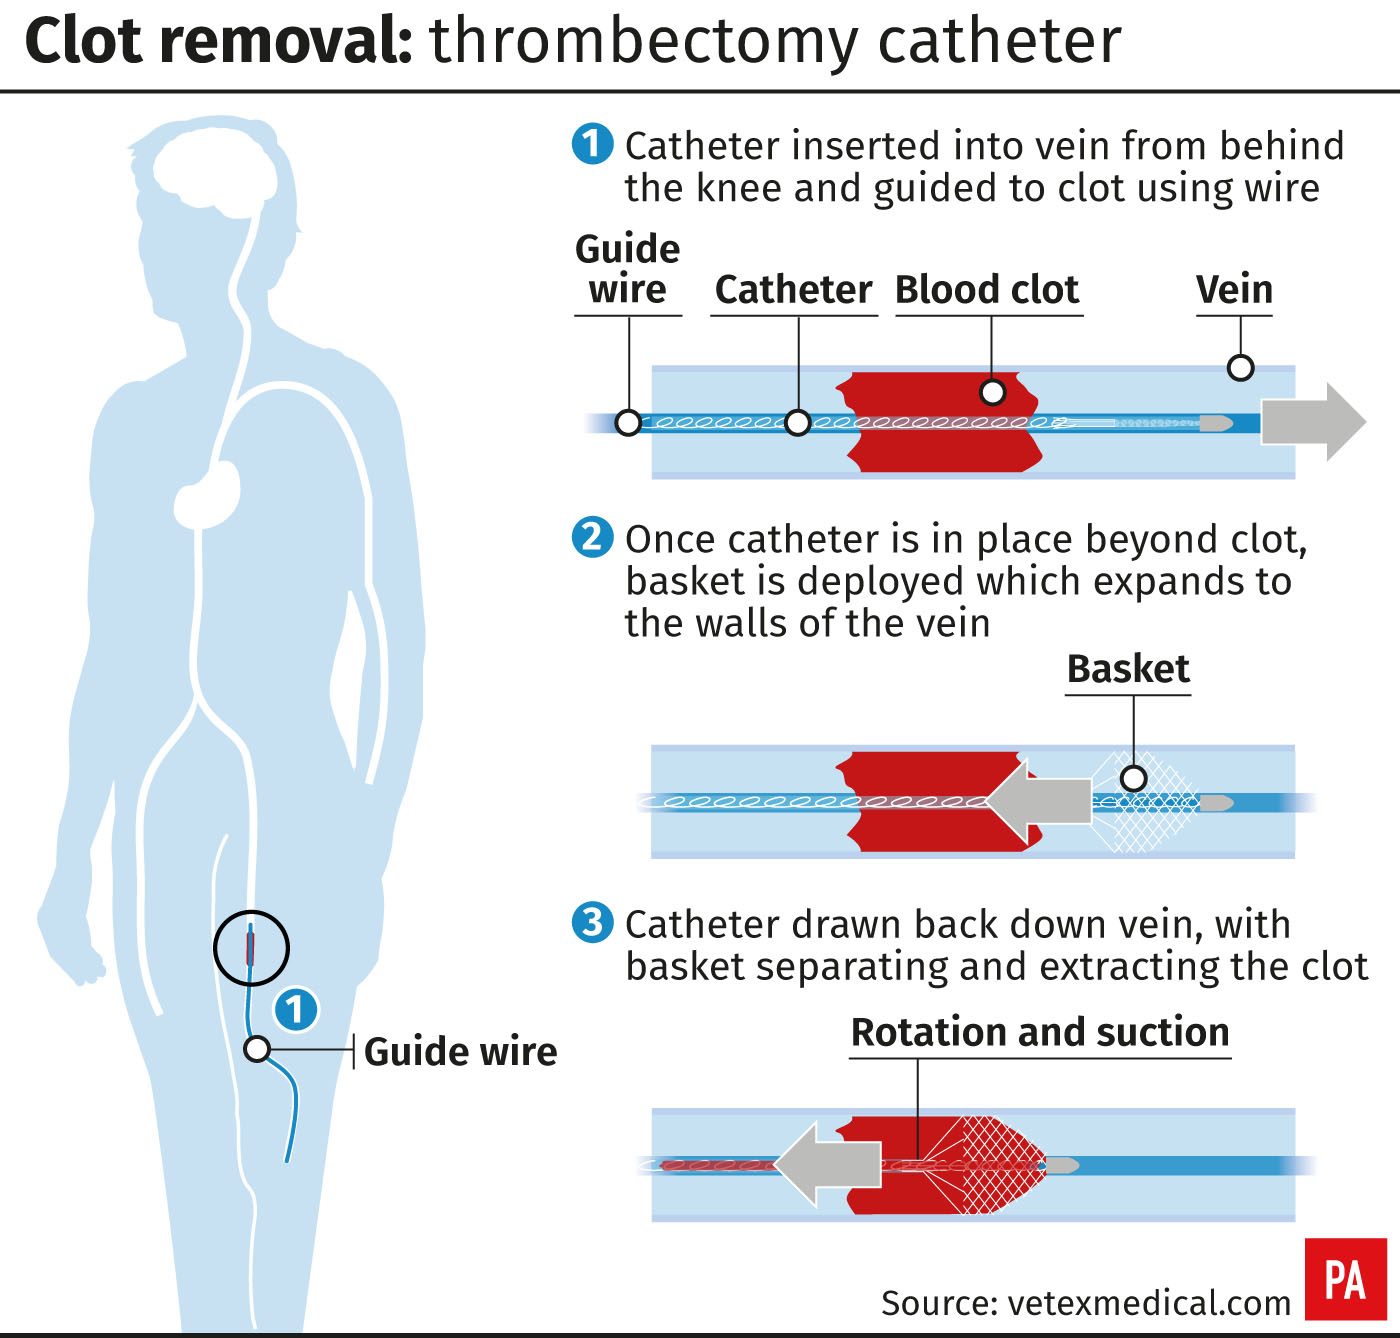 Clot removal: thrombectomy catheter